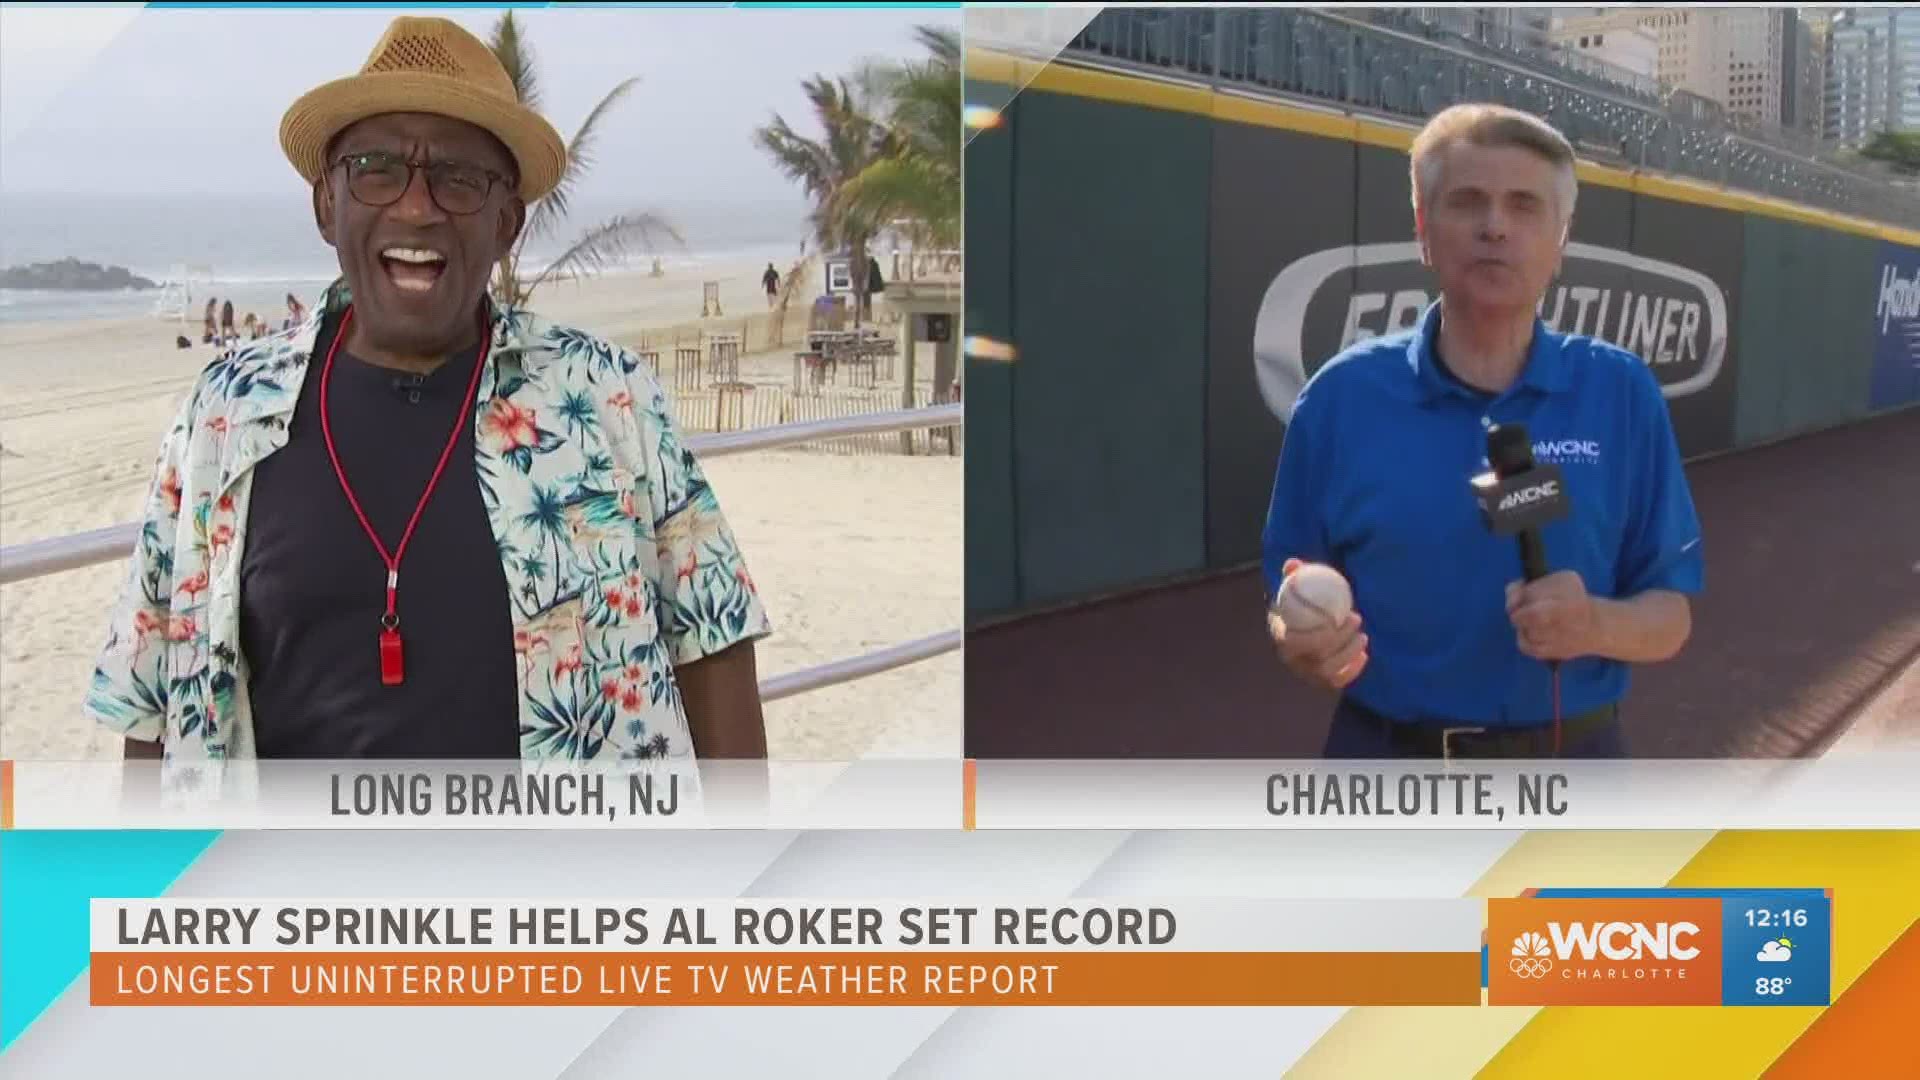 Al Roker celebrates five years of 'Rokerthon' by featuring over 60 weather reports from around the country, including WCNC Charlotte's own Larry Sprinkle!